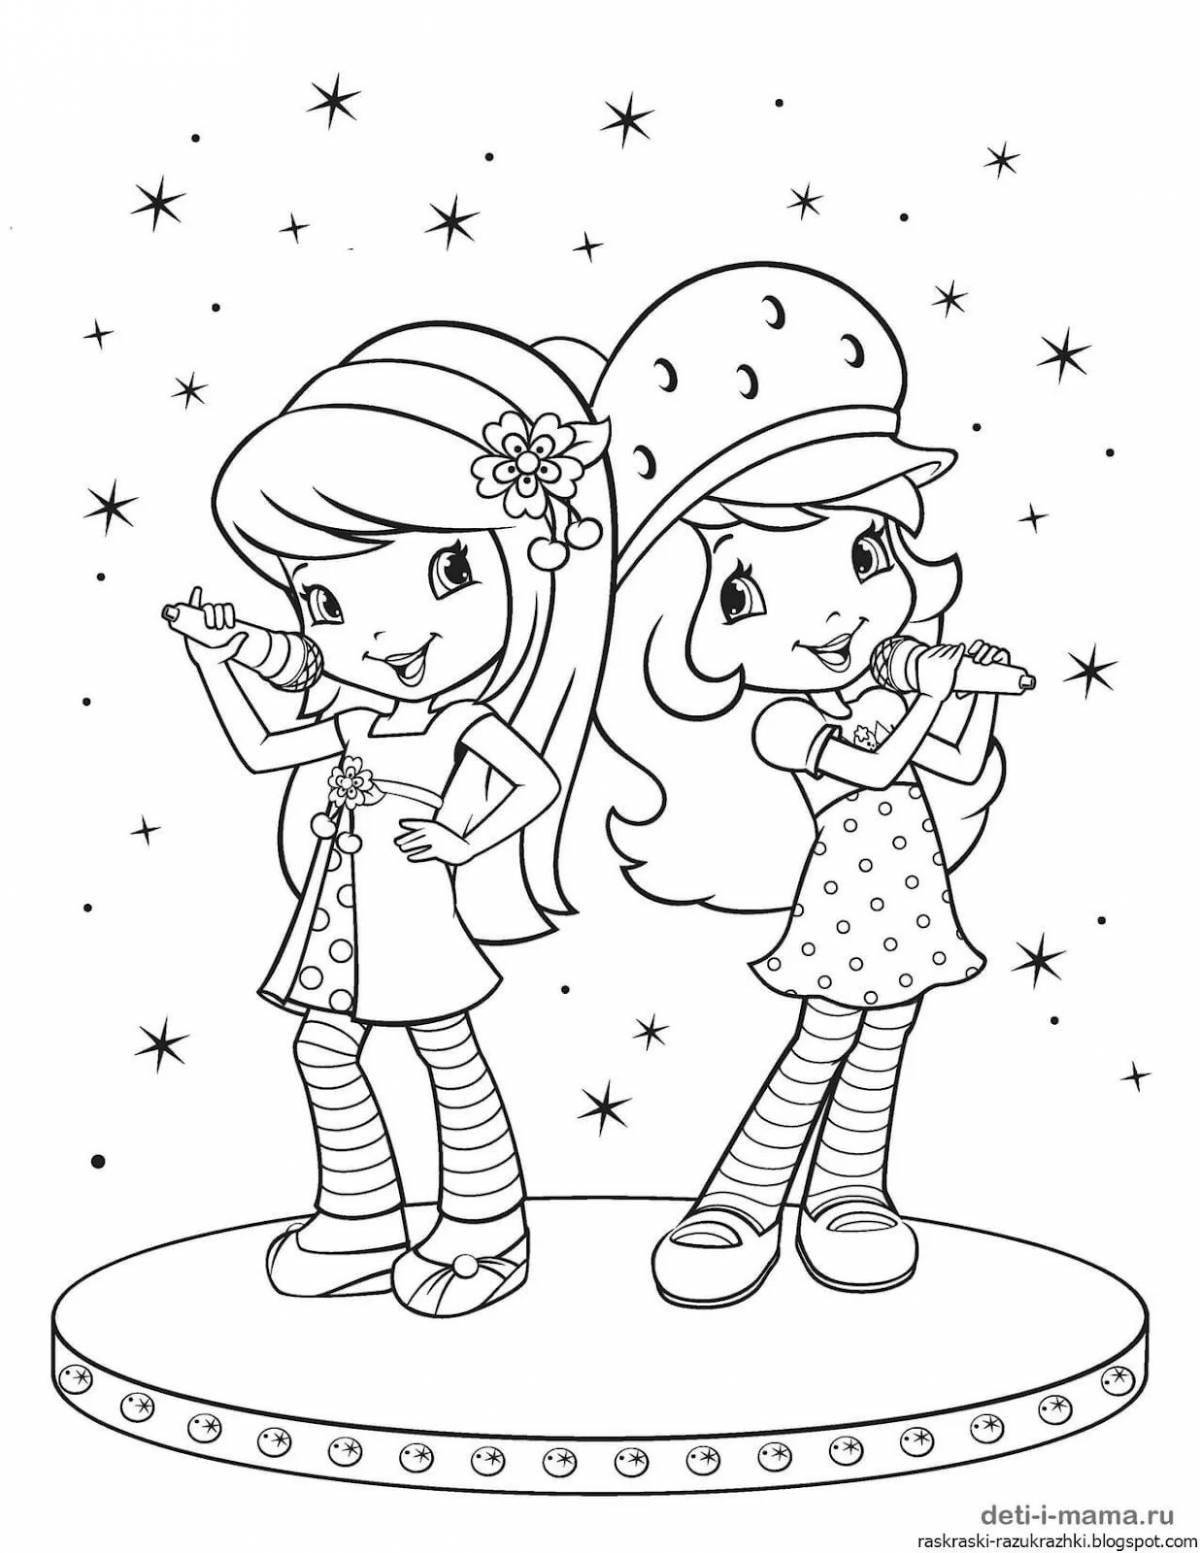 Fun coloring for two girls